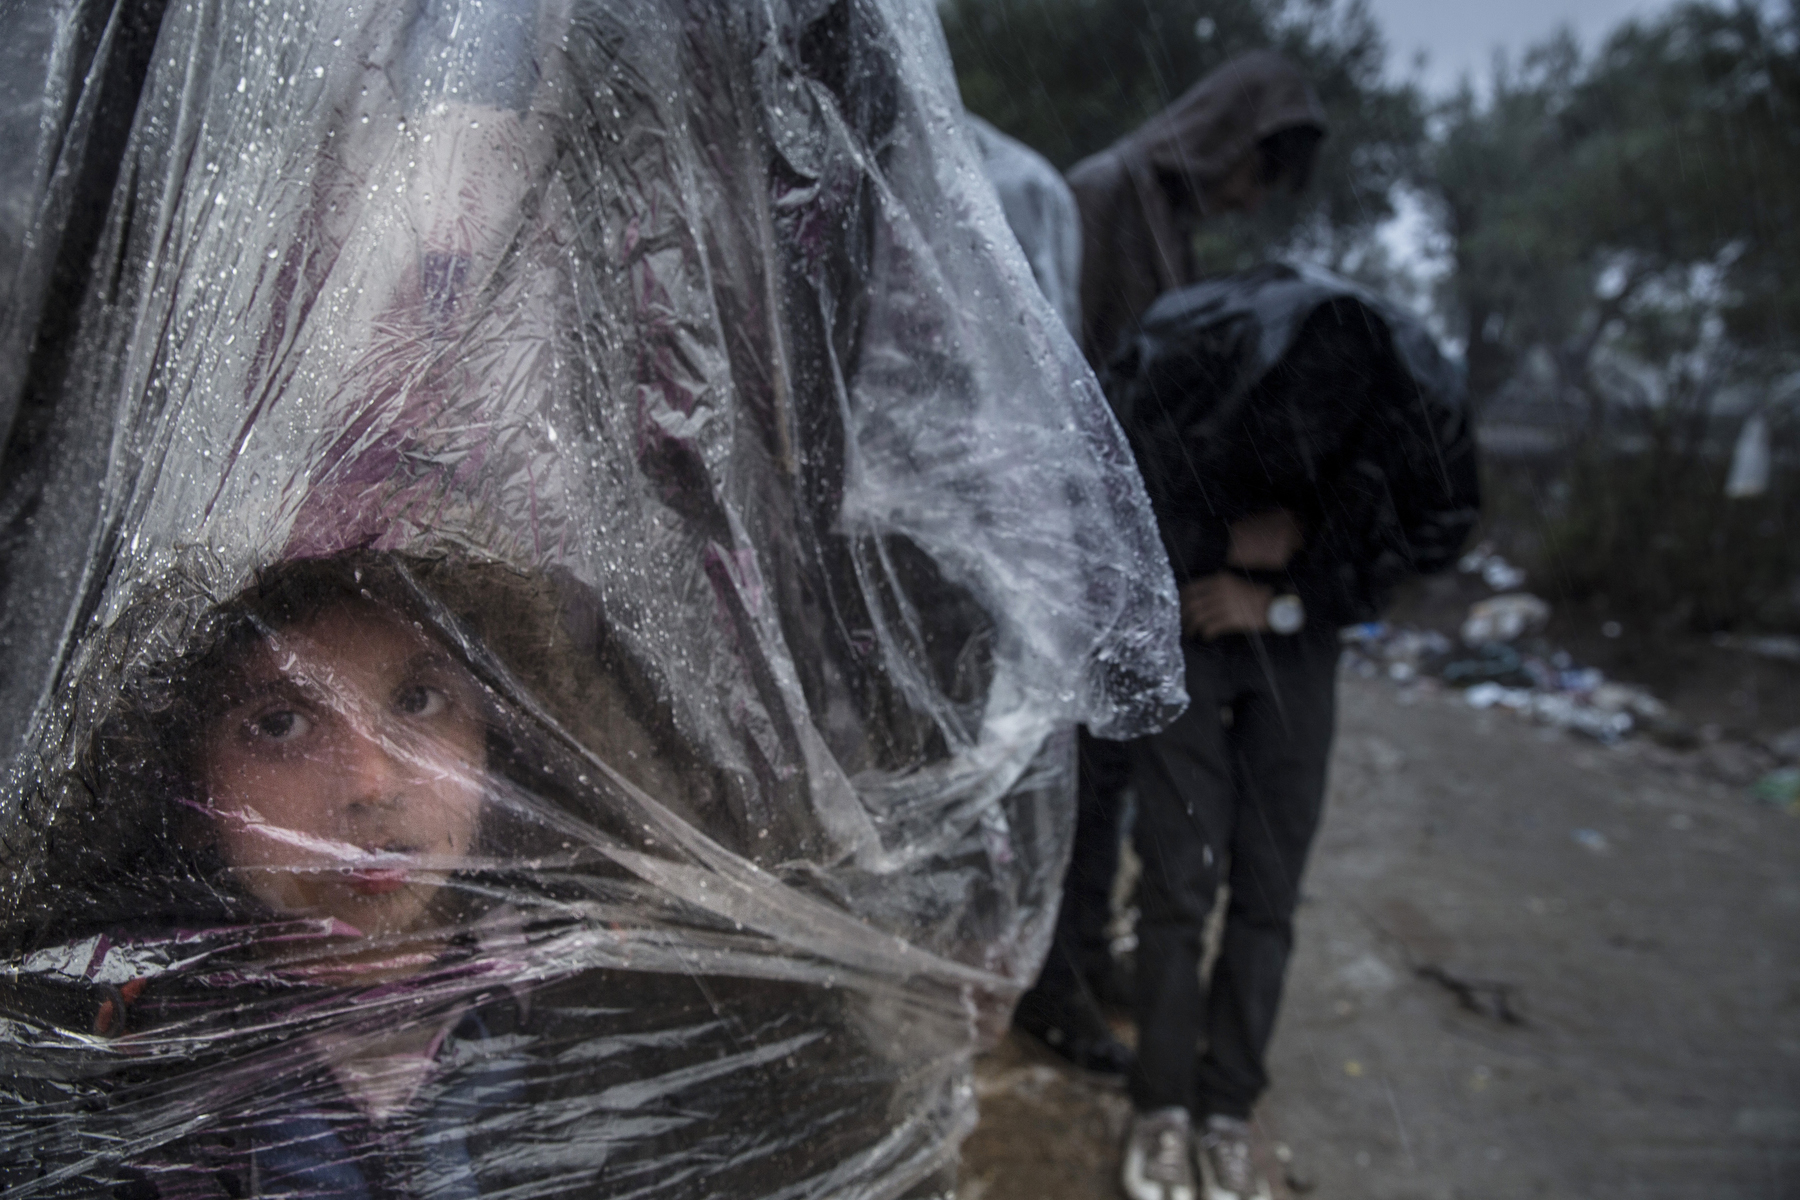 LESBOS, GREECE - OCTOBER 23:  Rain and cold weather create more suffering for refugees as Afghans stand for hours trapped at the gates waiting for their turn to register at Moria camp. Colder weather and rough seas continue to cause deaths at sea as thousands travel in overcrowded small rafts. According to the IOM, an estimated 100,000 people landed in Greece, an average of almost 4,500 per day in late October and November. Nearly all of those entering Greece on a boat from Turkey are from the war zones of Syria, Iraq and Afghanistan. (Photo by Paula Bronstein)